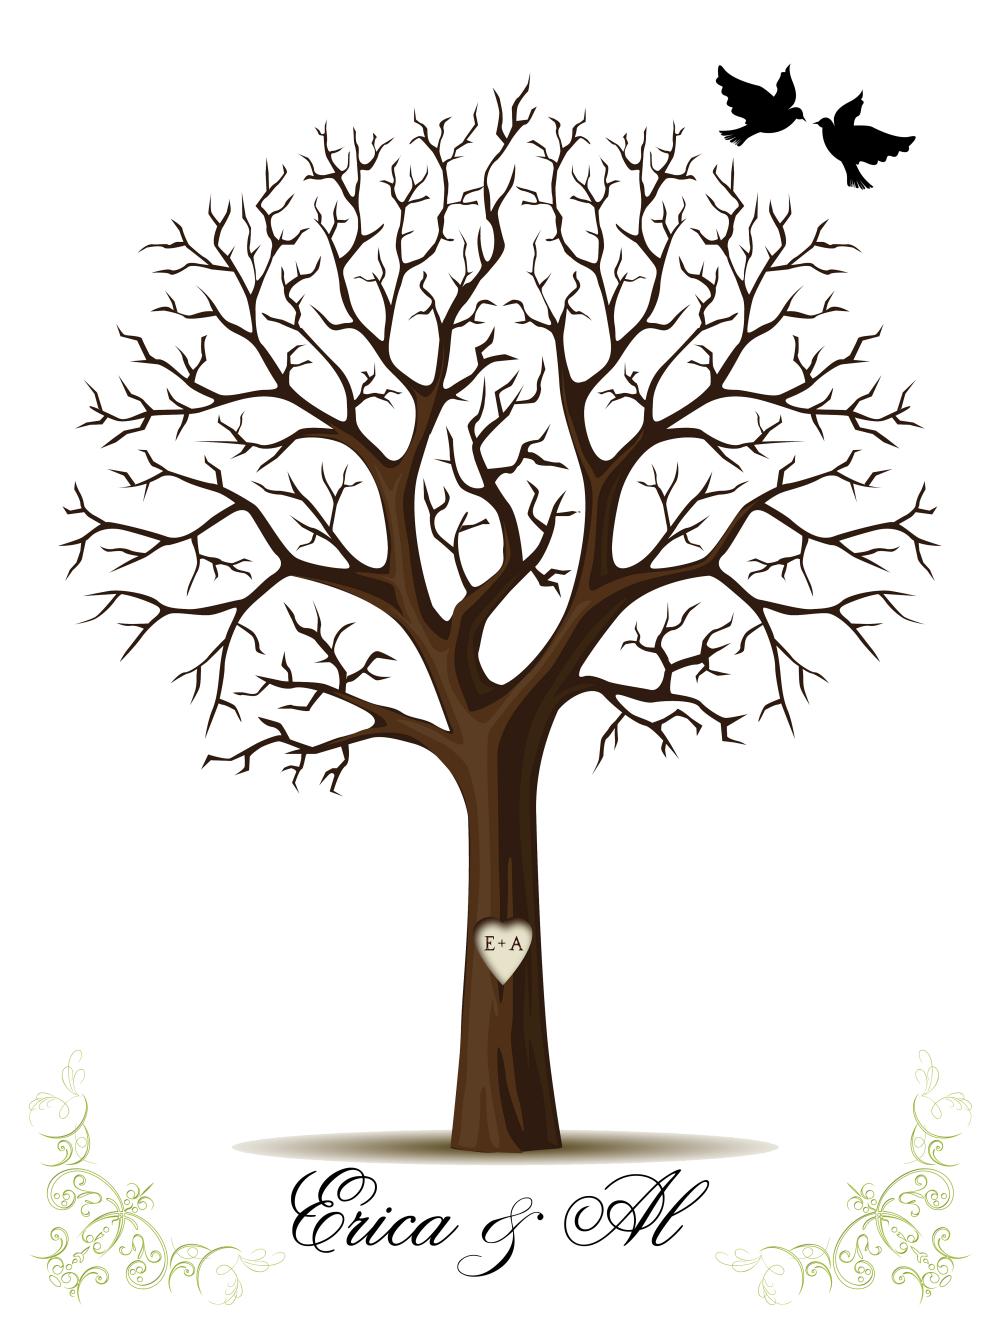 Free Tree Template, Download Free Tree Template png images, Free